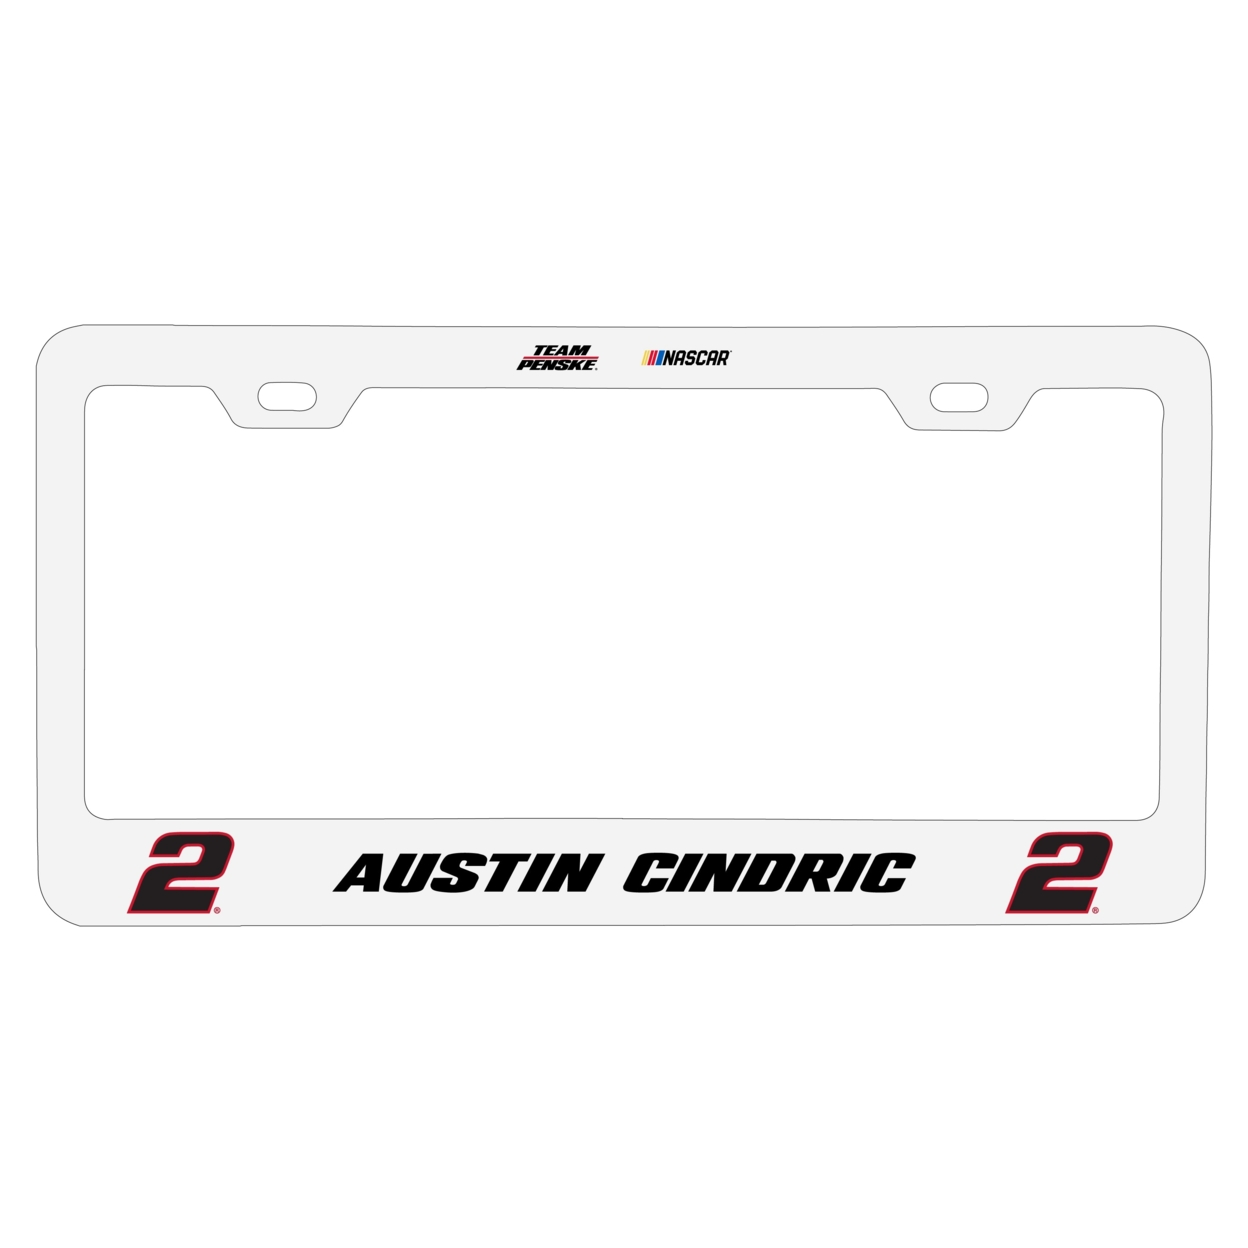 #2 Austin Cindric Officially Licensed Metal License Plate Frame